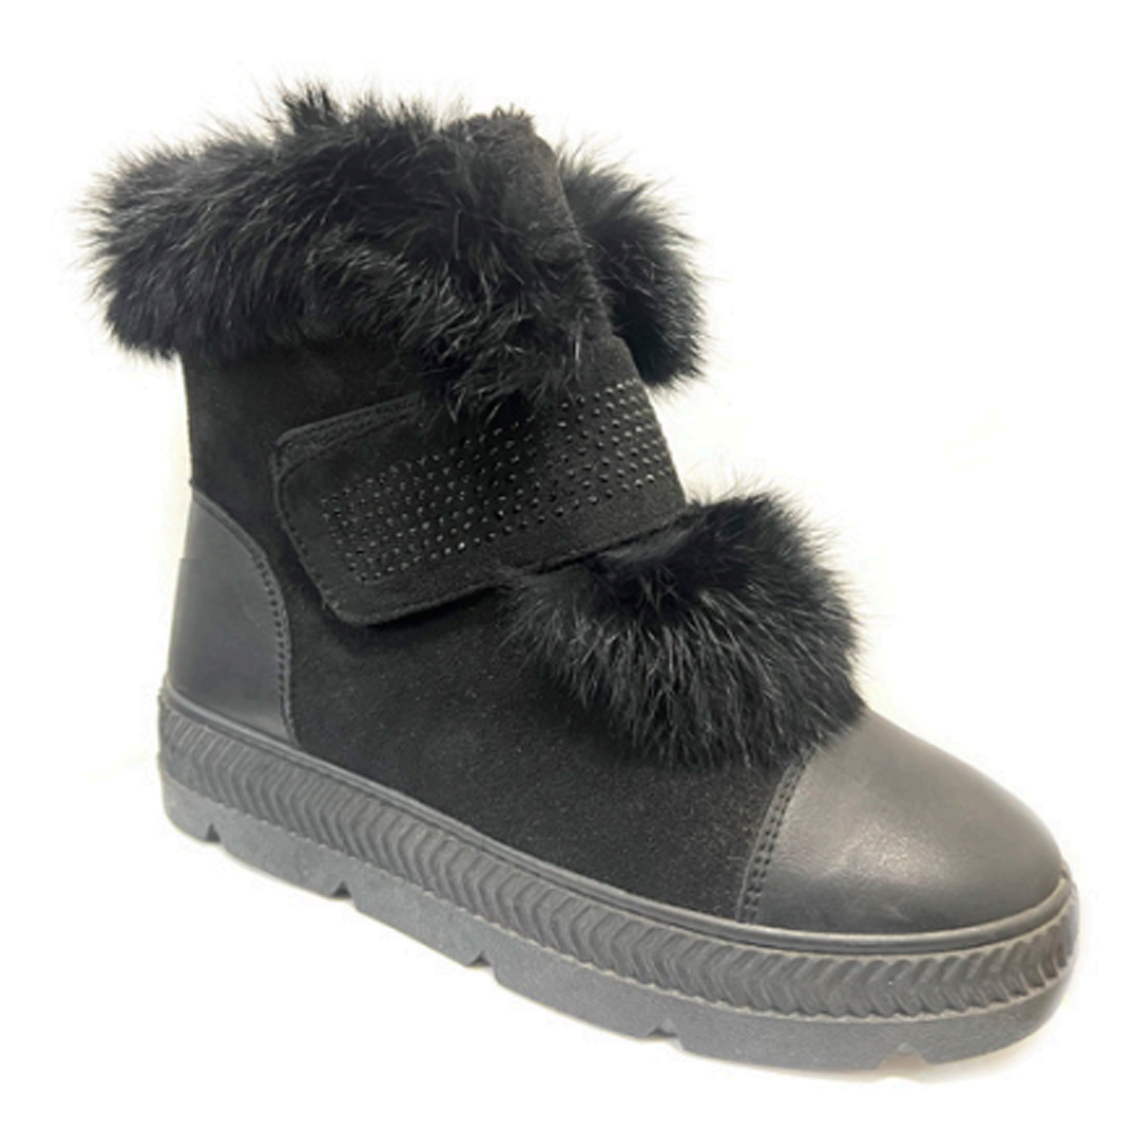 Wholesale Women's Boots Winter Style Shoes Madelynn NPE27